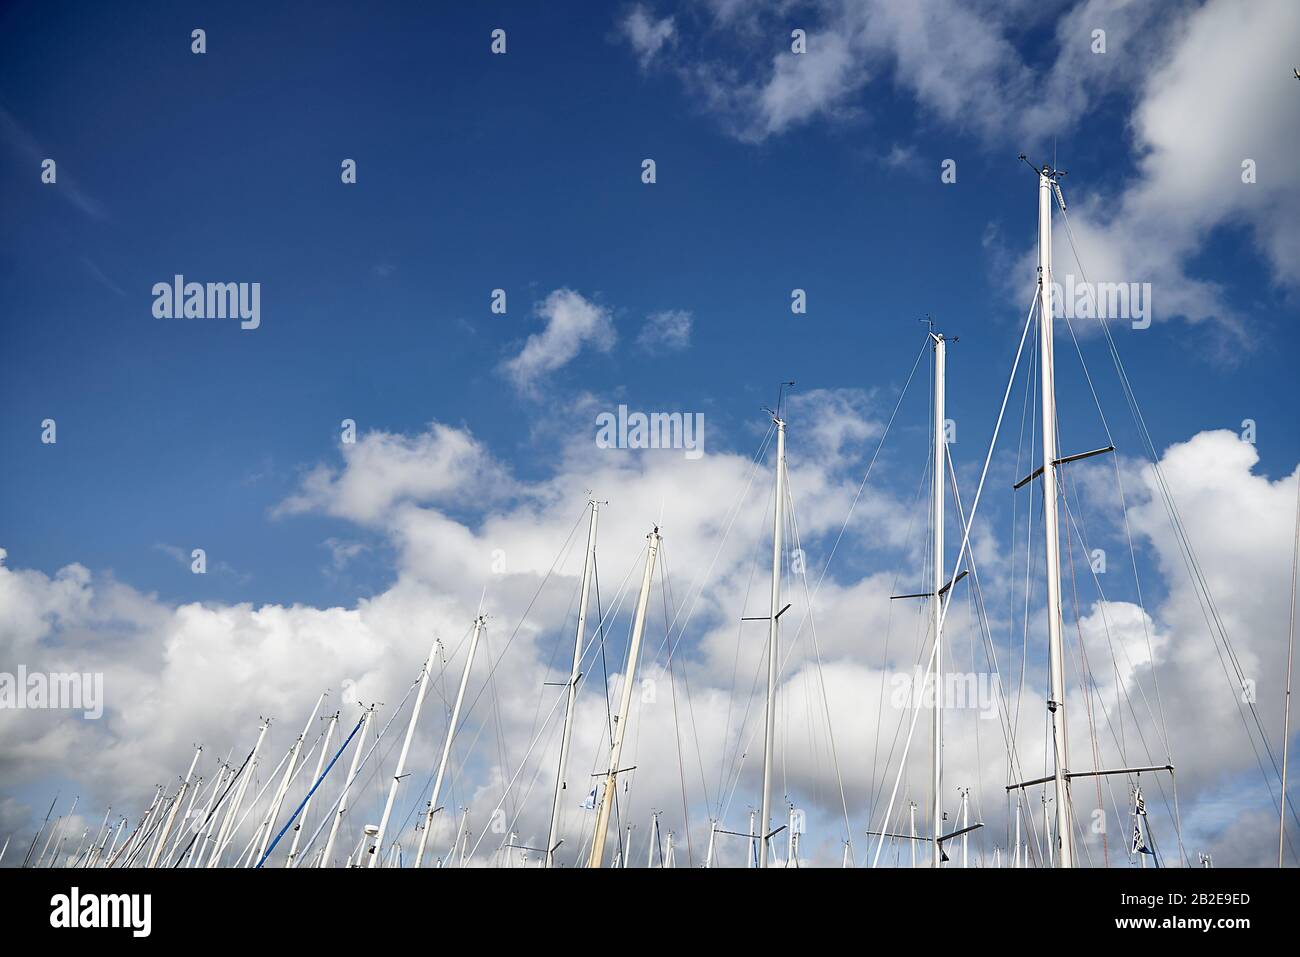 SCHEVENINGEN - Sailing masts of the sailing boats in the harbor of Scheveningen with clouds in the sky. ANP COPYRIGHT SASH ALEXANDER Stock Photo